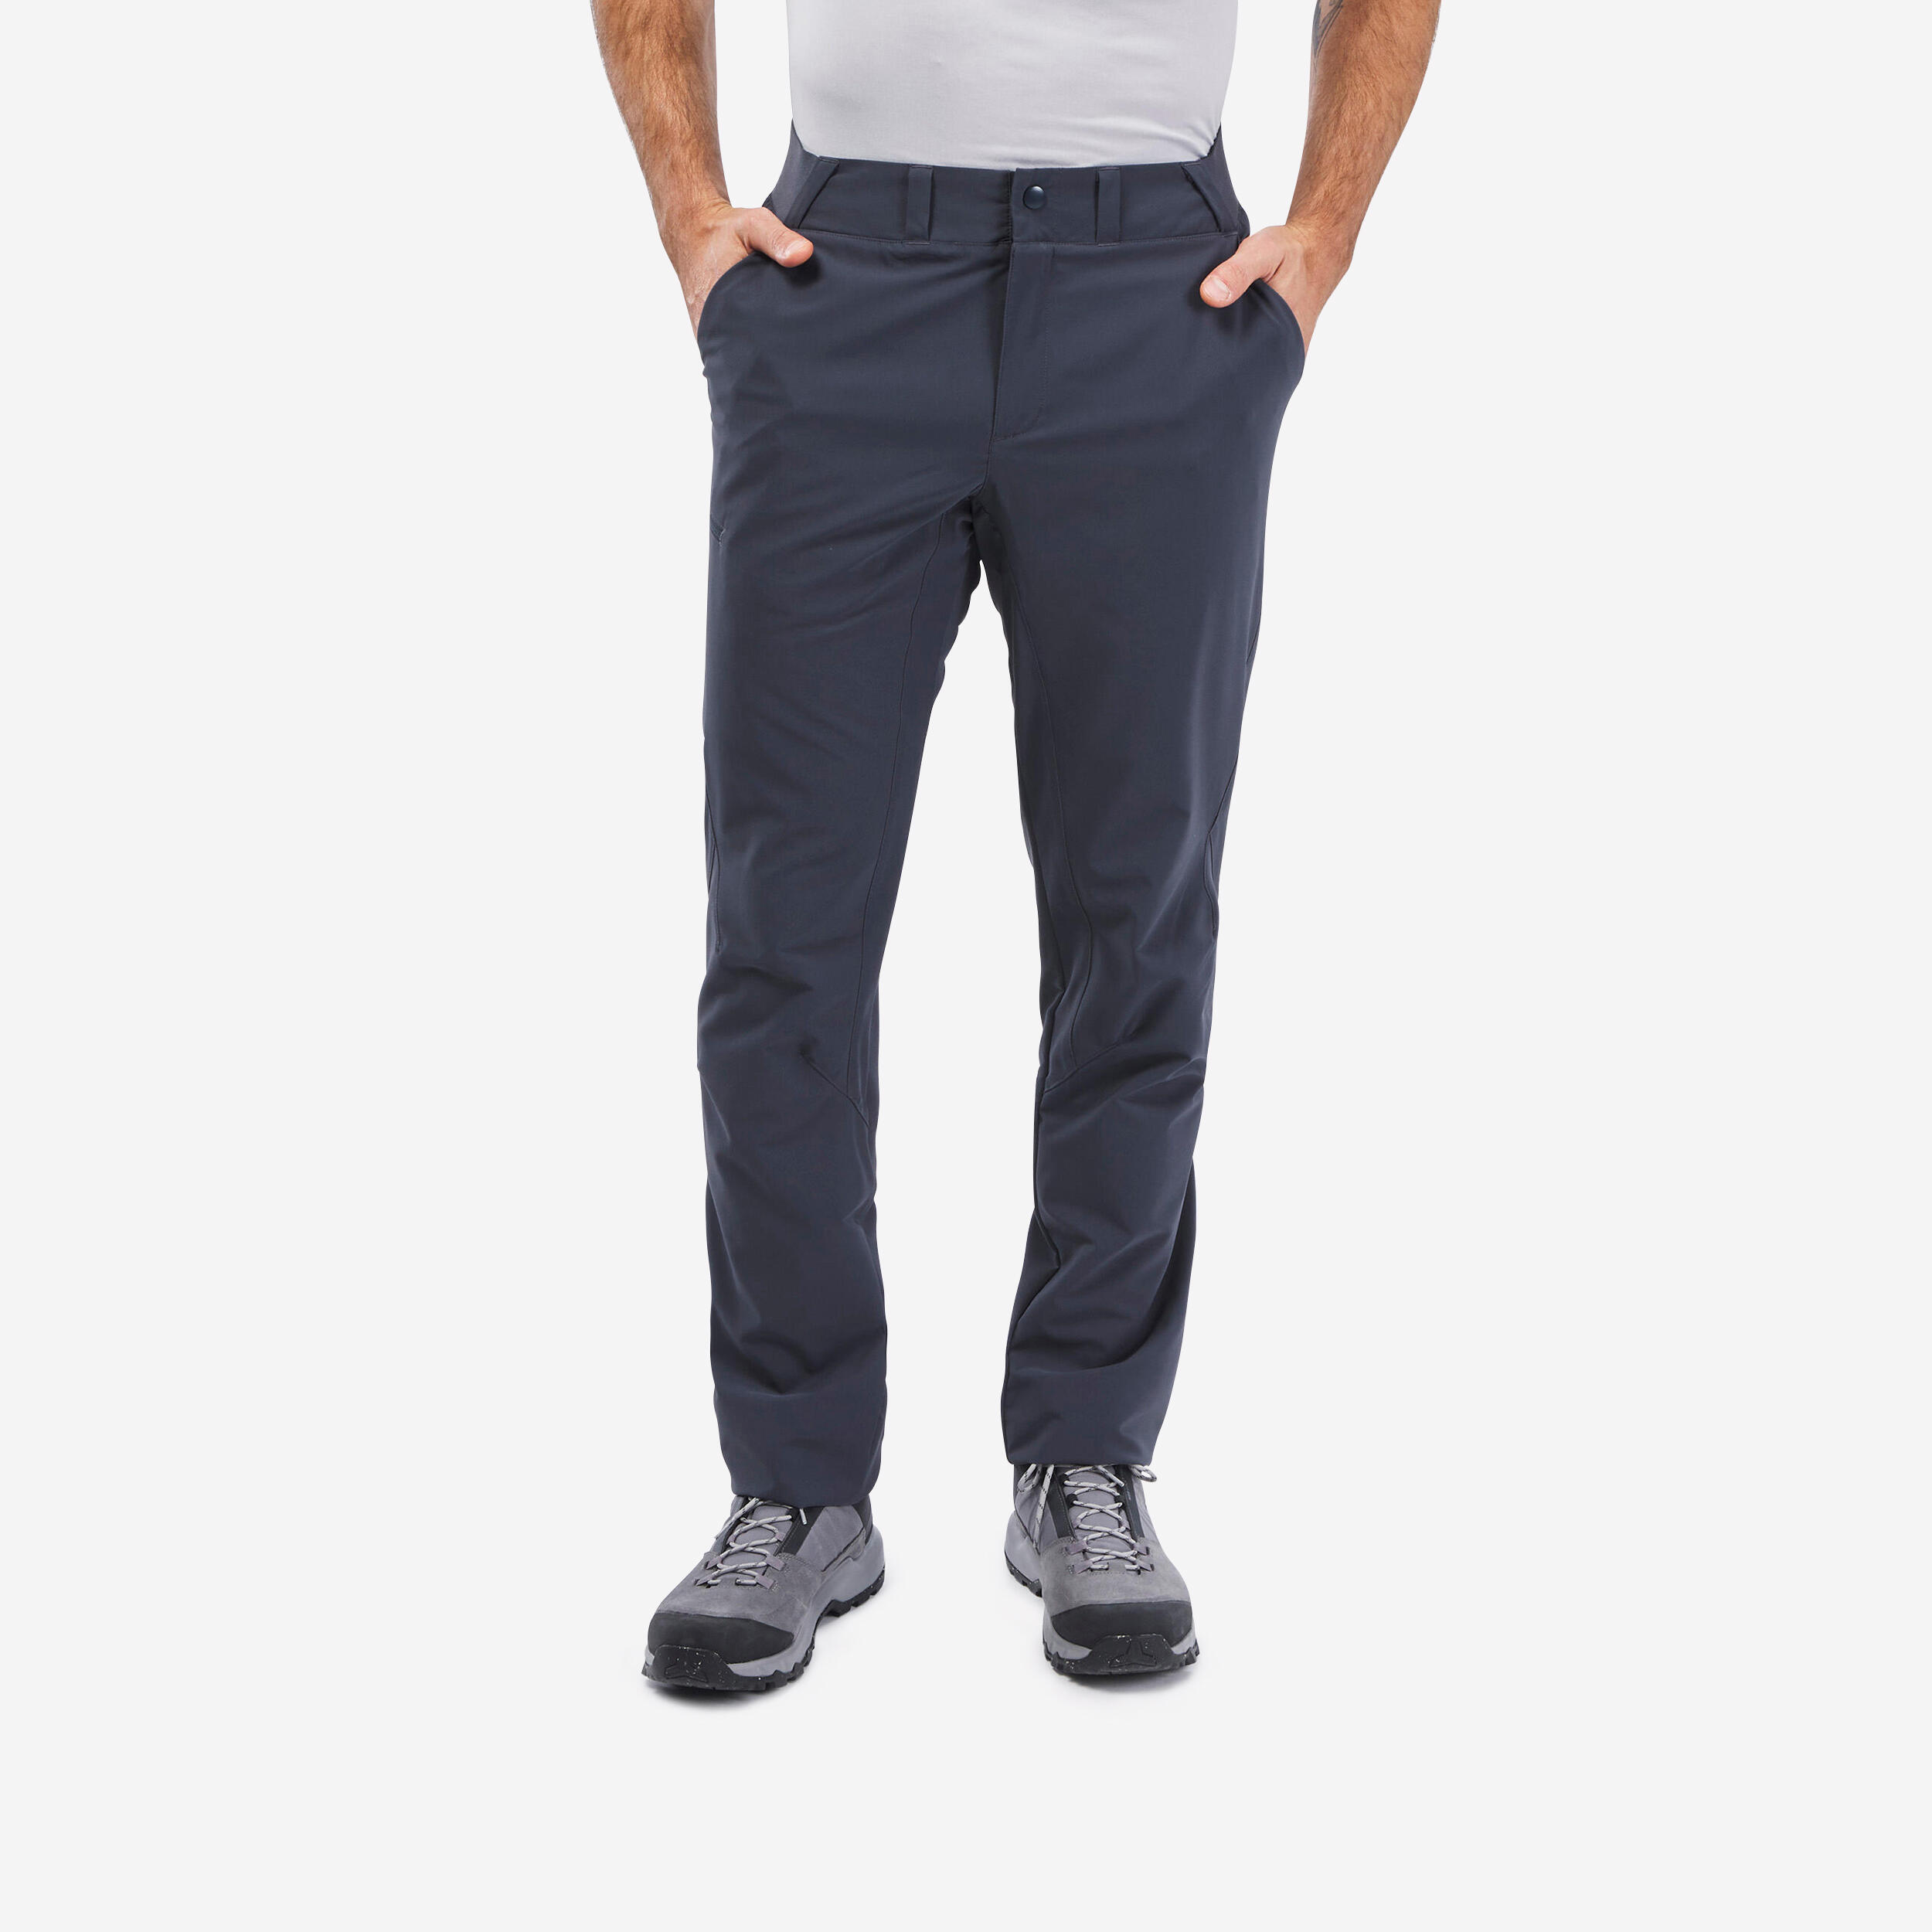 Buy Men's Cricket Straight Fit Trackpants CTS 500 Blue Online | Decathlon